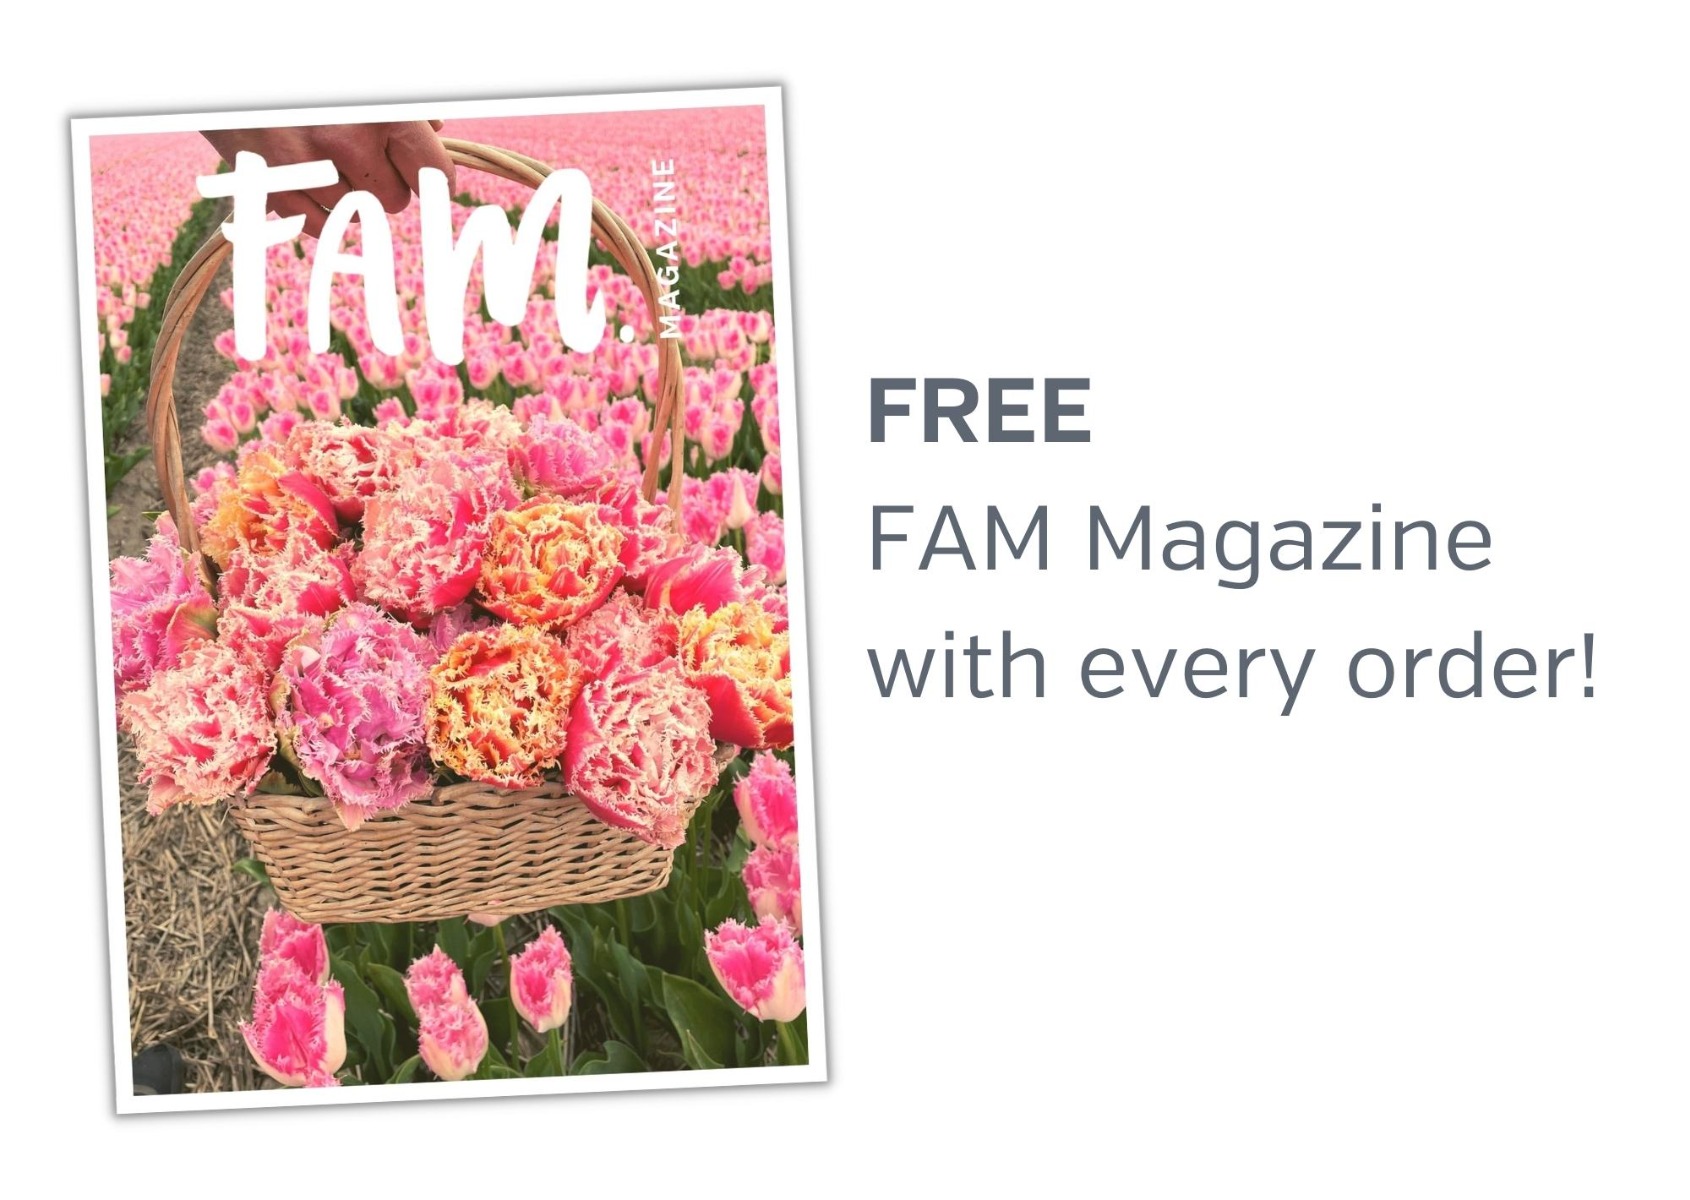 free magazine with every order